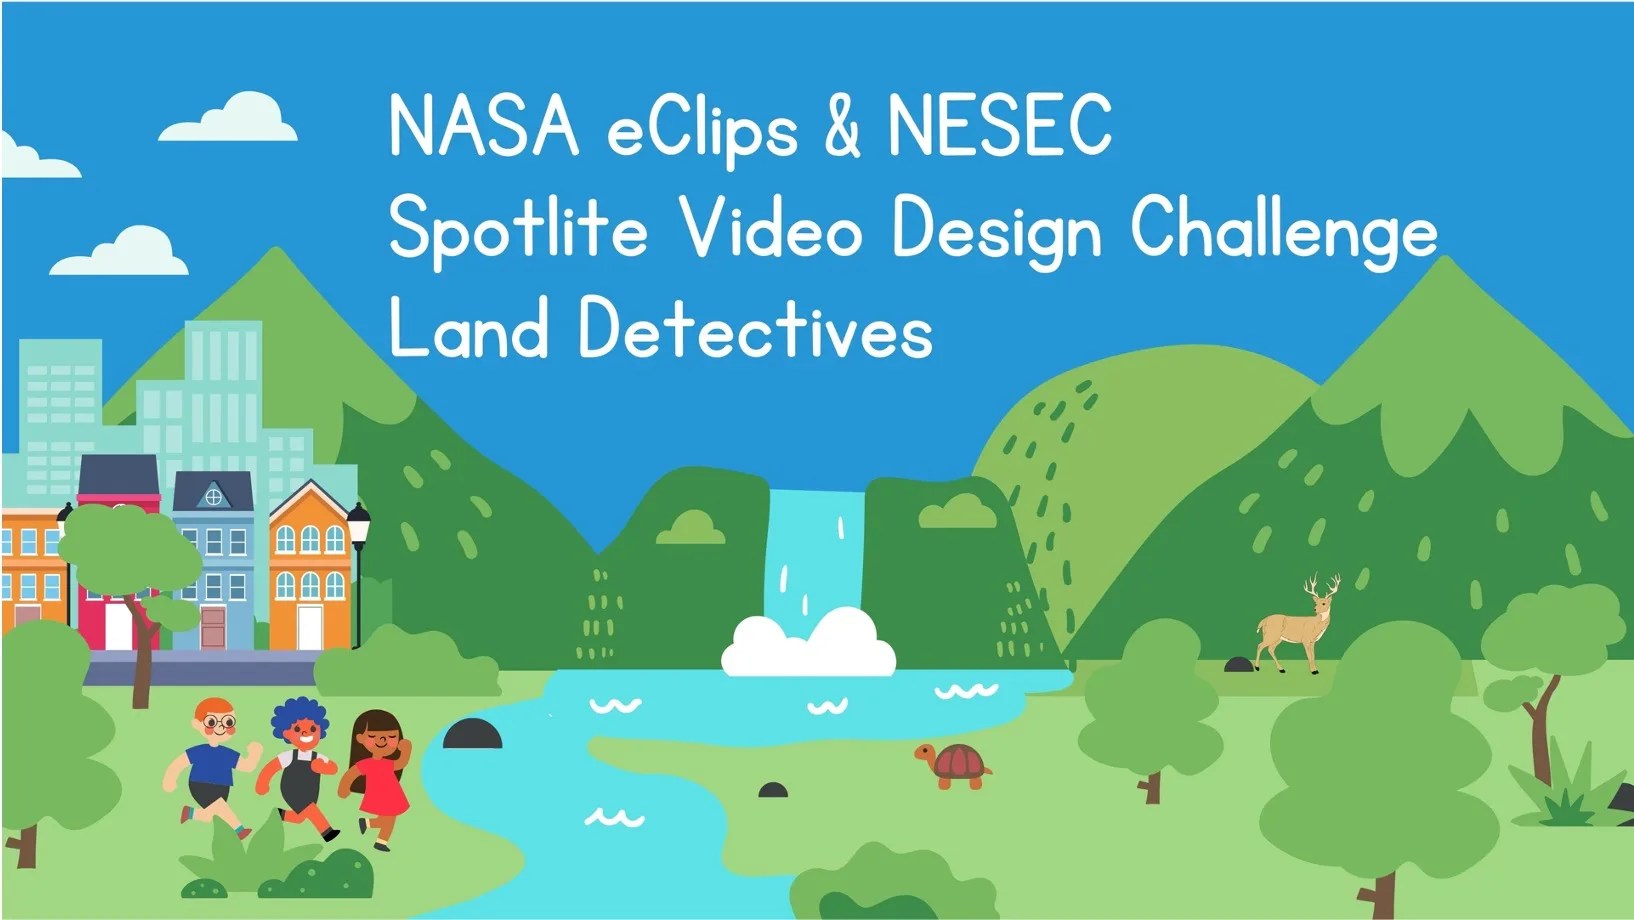 This cartoon graphic shows children running around outside in beautiful green grass near a river and an urban neighborhood. There are trees and bushes around, with plenty of natural landscape, as well as a wandering tortoise. In the background there's a waterfall, some mountains and a bright blue sky containing a few clouds. The text overlaying the sky reads: NASA eClips & NESEC Spotlite Video Design Challenge: Land Detectives